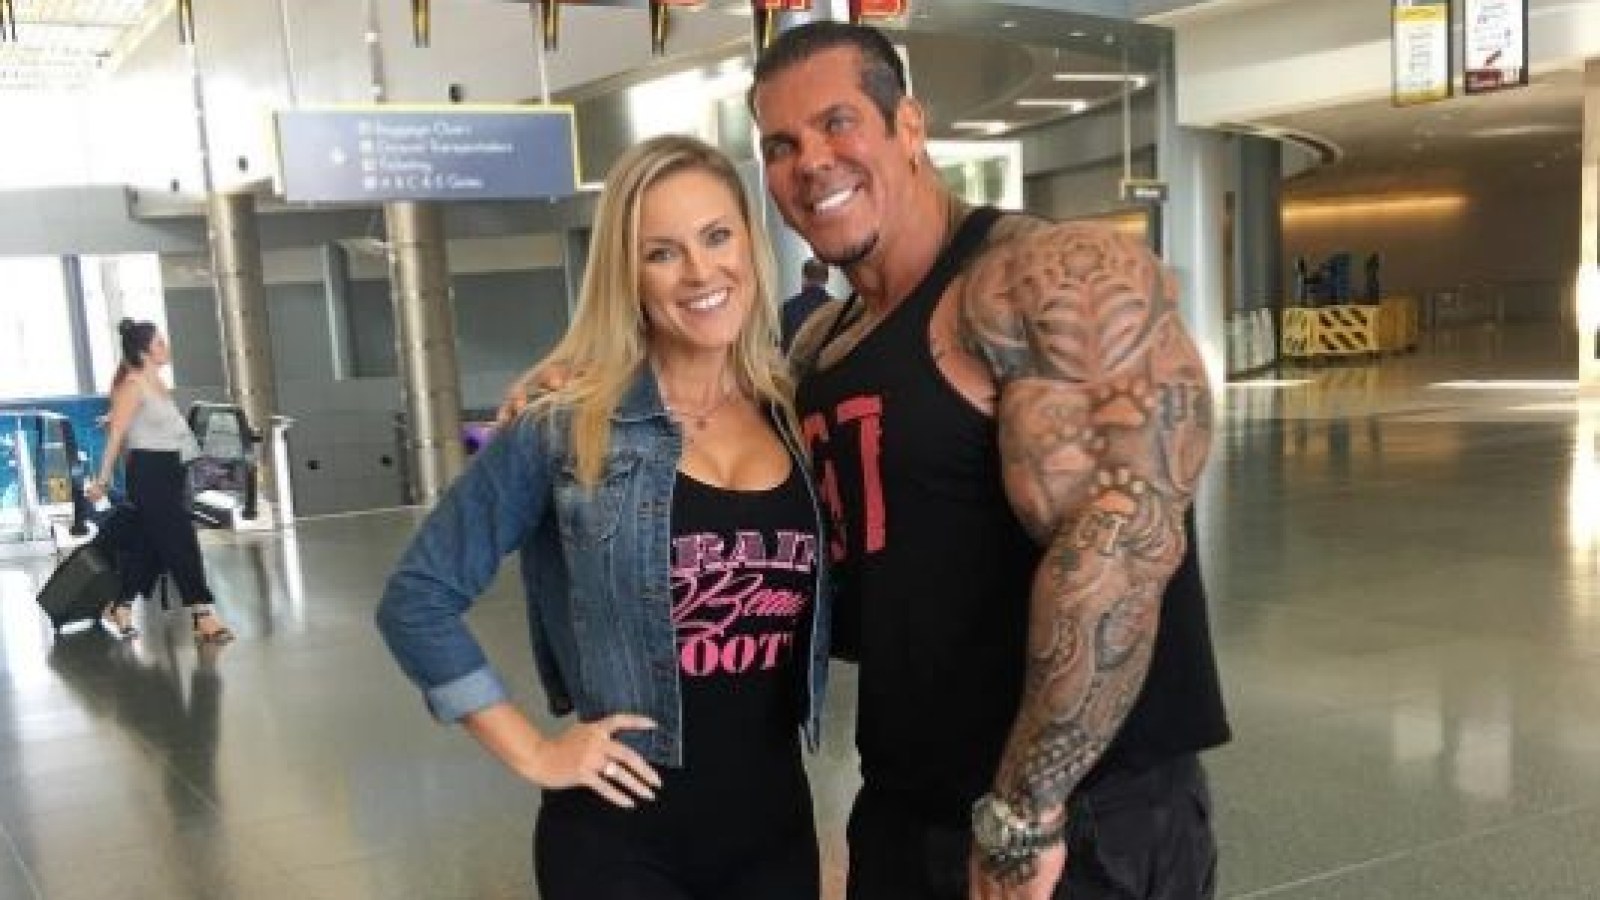 Baby Materialisme Hofte What Happened To Rich Piana? Girlfriend Chanel Jansen Instagrams Amid  Overdose Rumors